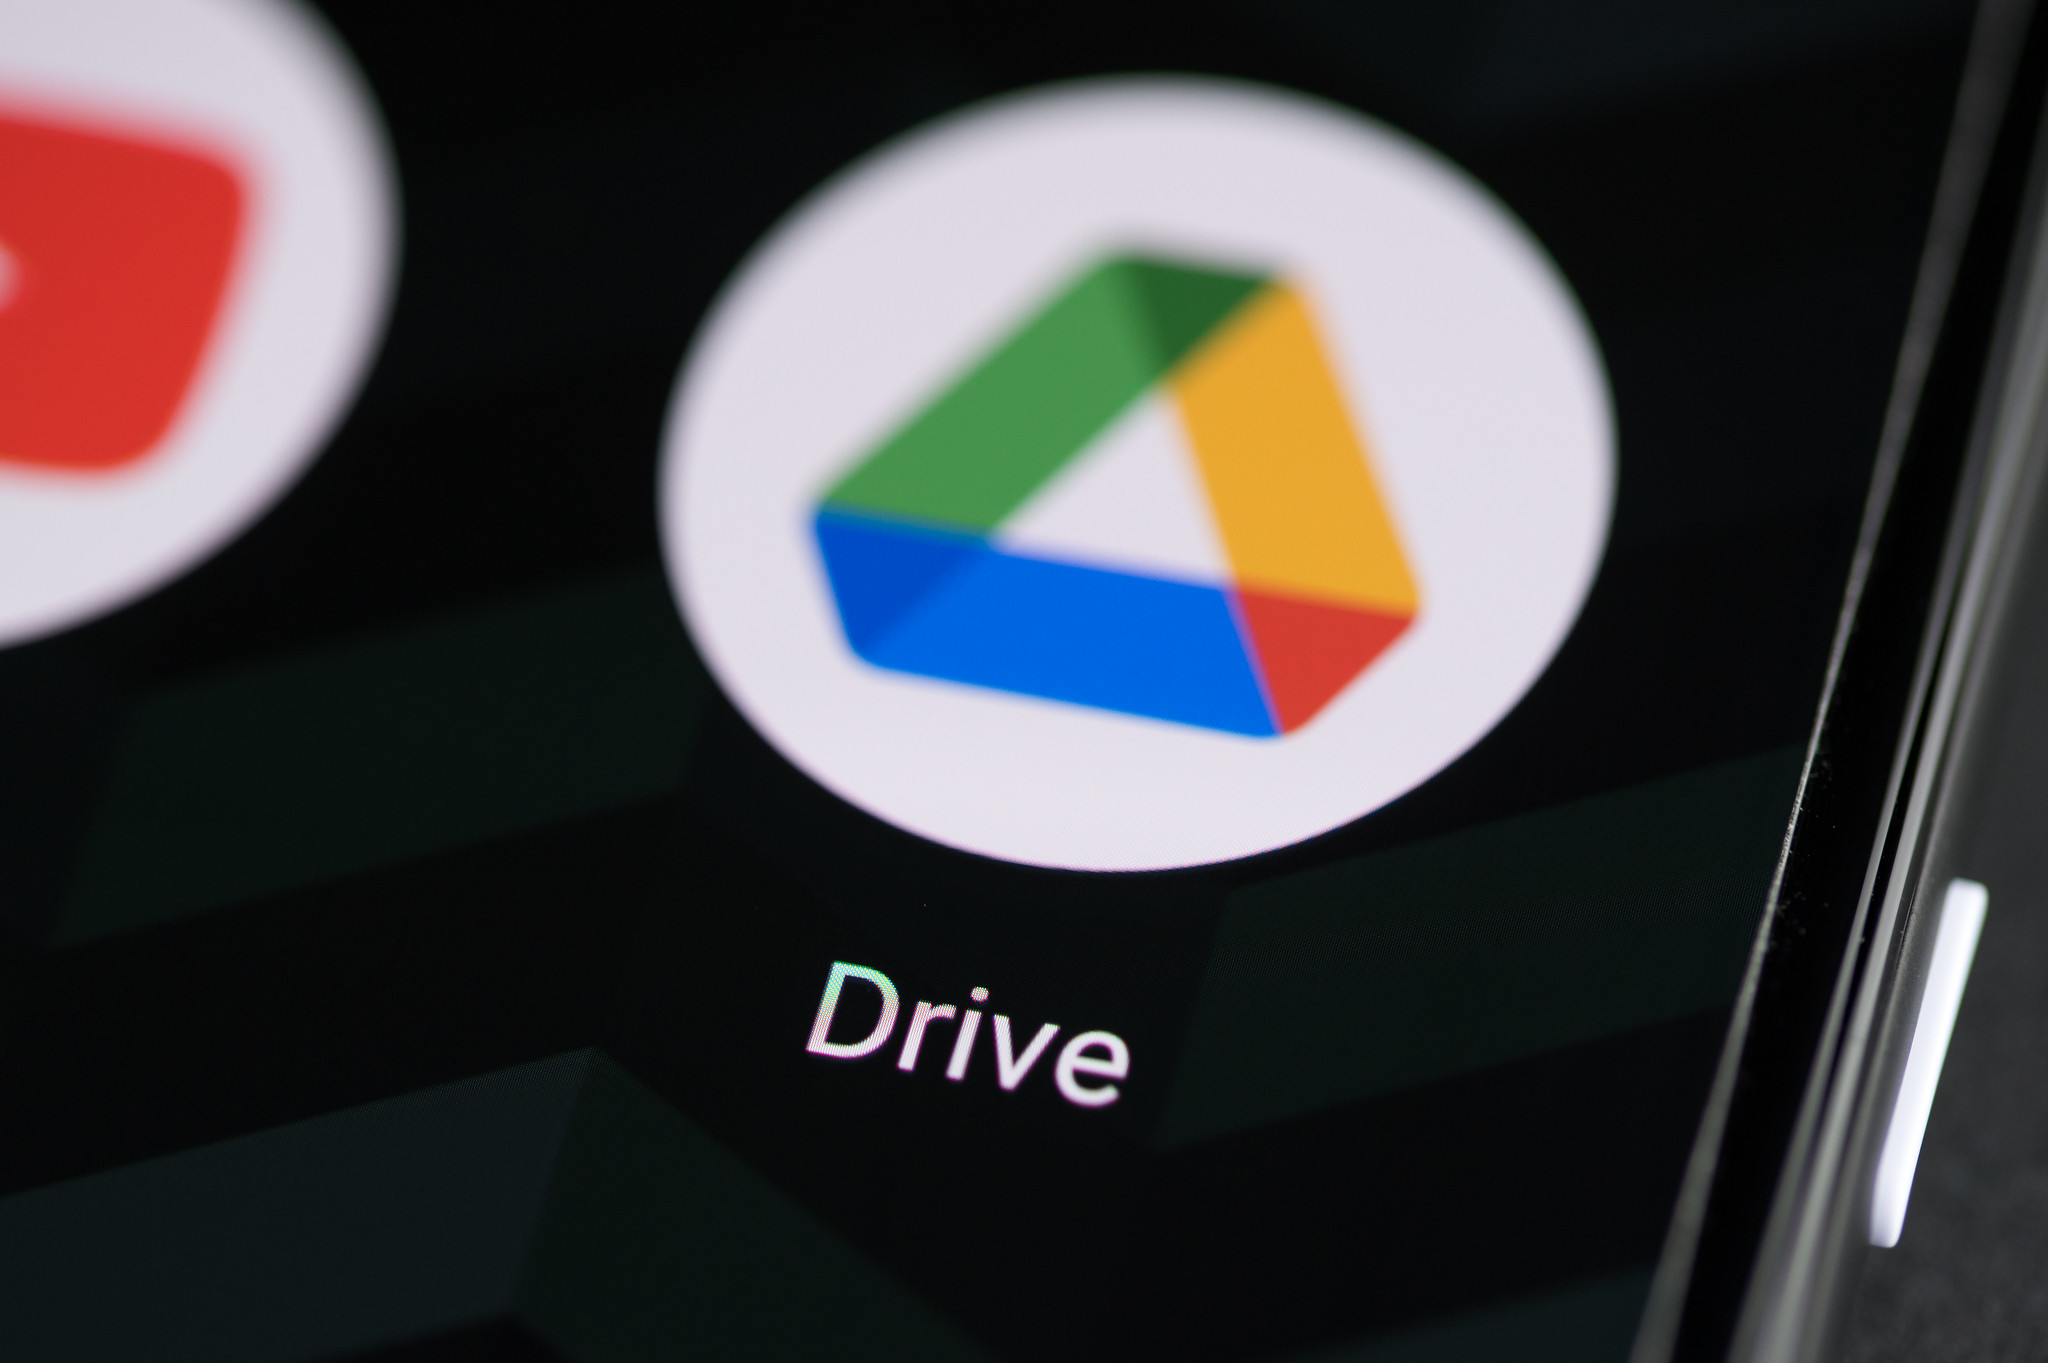 Have you exceeded 15 GB for free?  See if Google can delete your Drive files